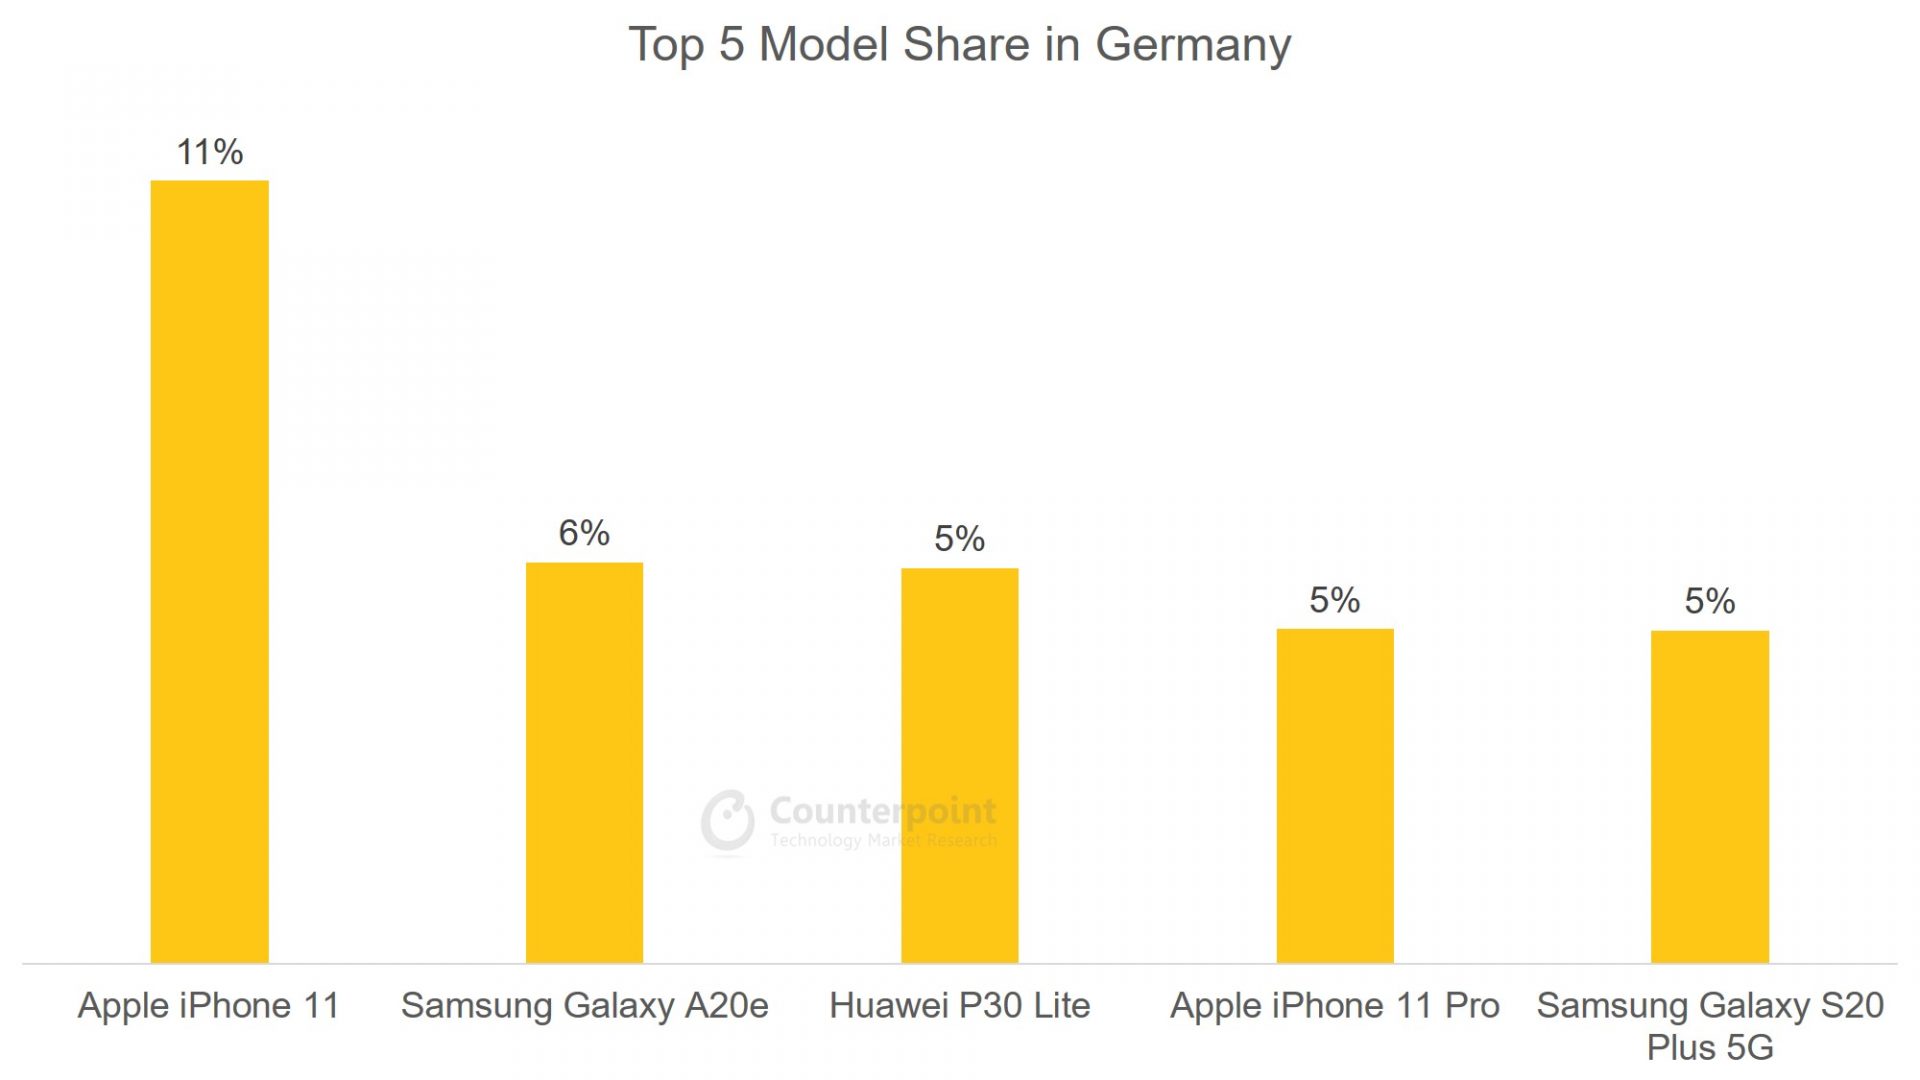 Counterpoint: (Apr 2020) Top 5 Smartphone Model Share in Germany